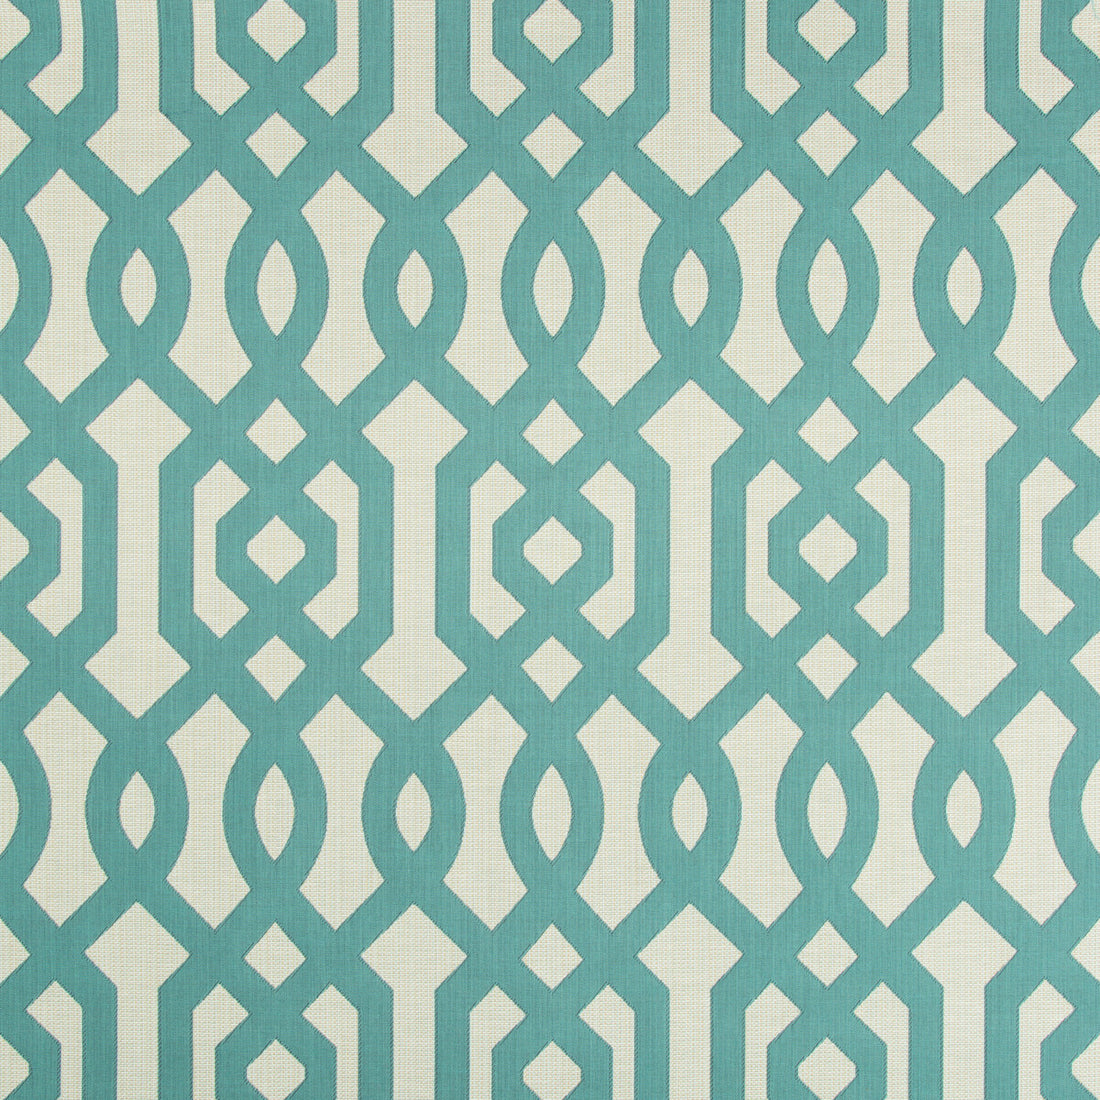 Kravet Design fabric in 34998-13 color - pattern 34998.13.0 - by Kravet Design in the Performance Crypton Home collection